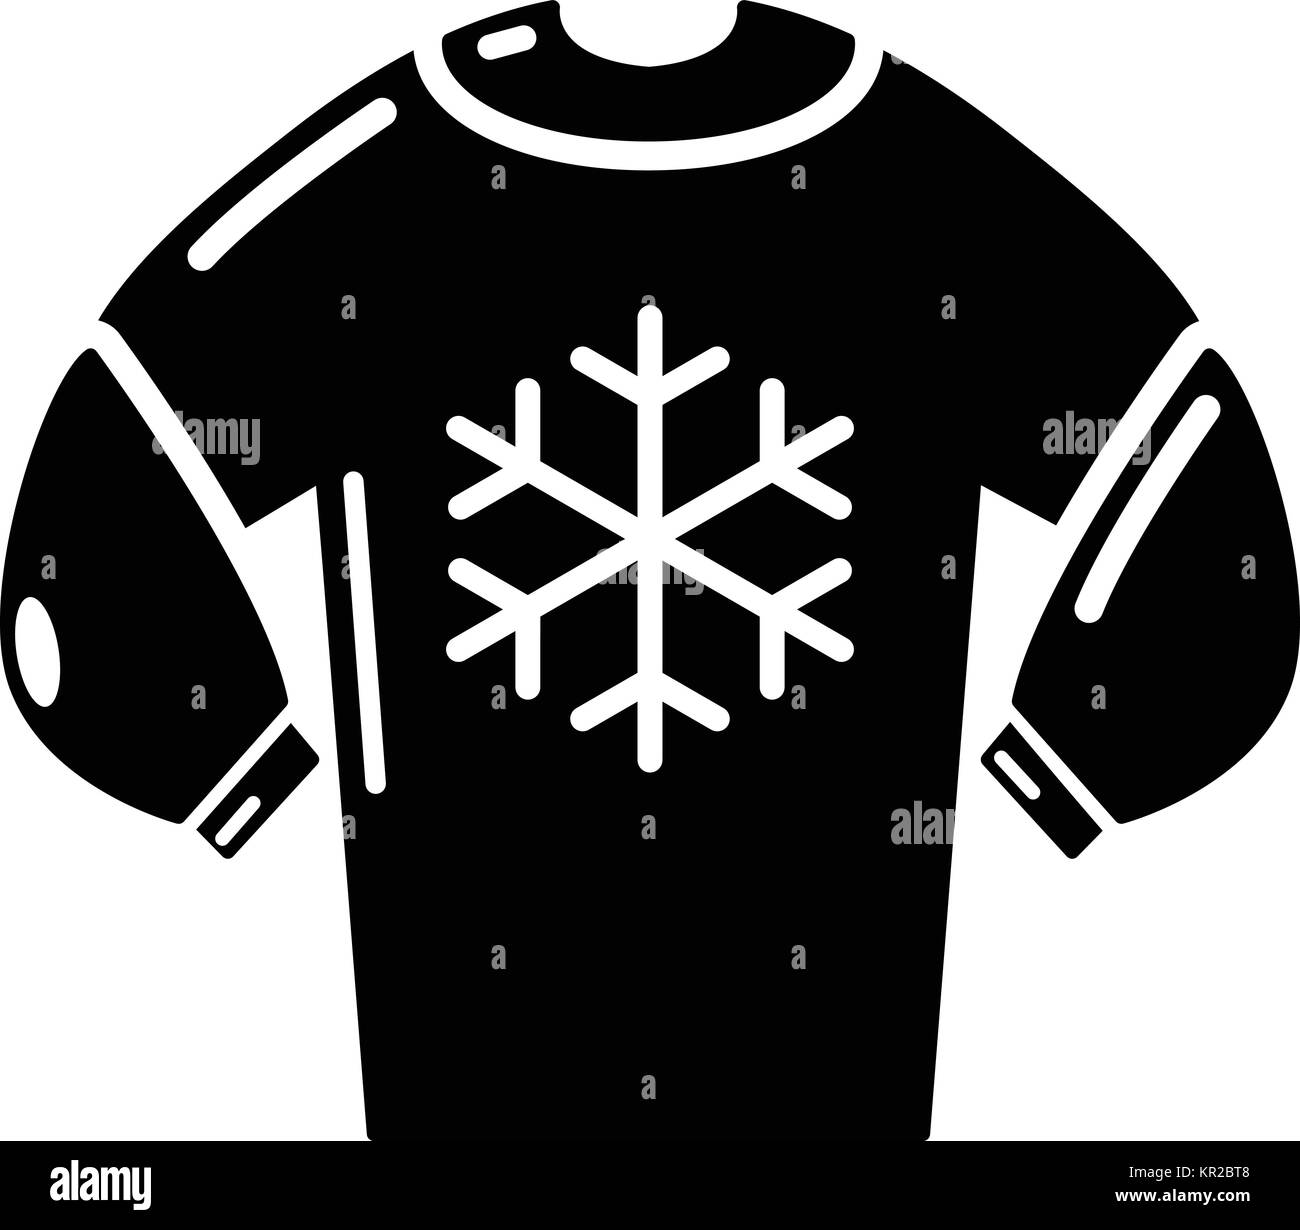 Ugly gift christmas sweater Black and White Stock Photos & Images - Alamy